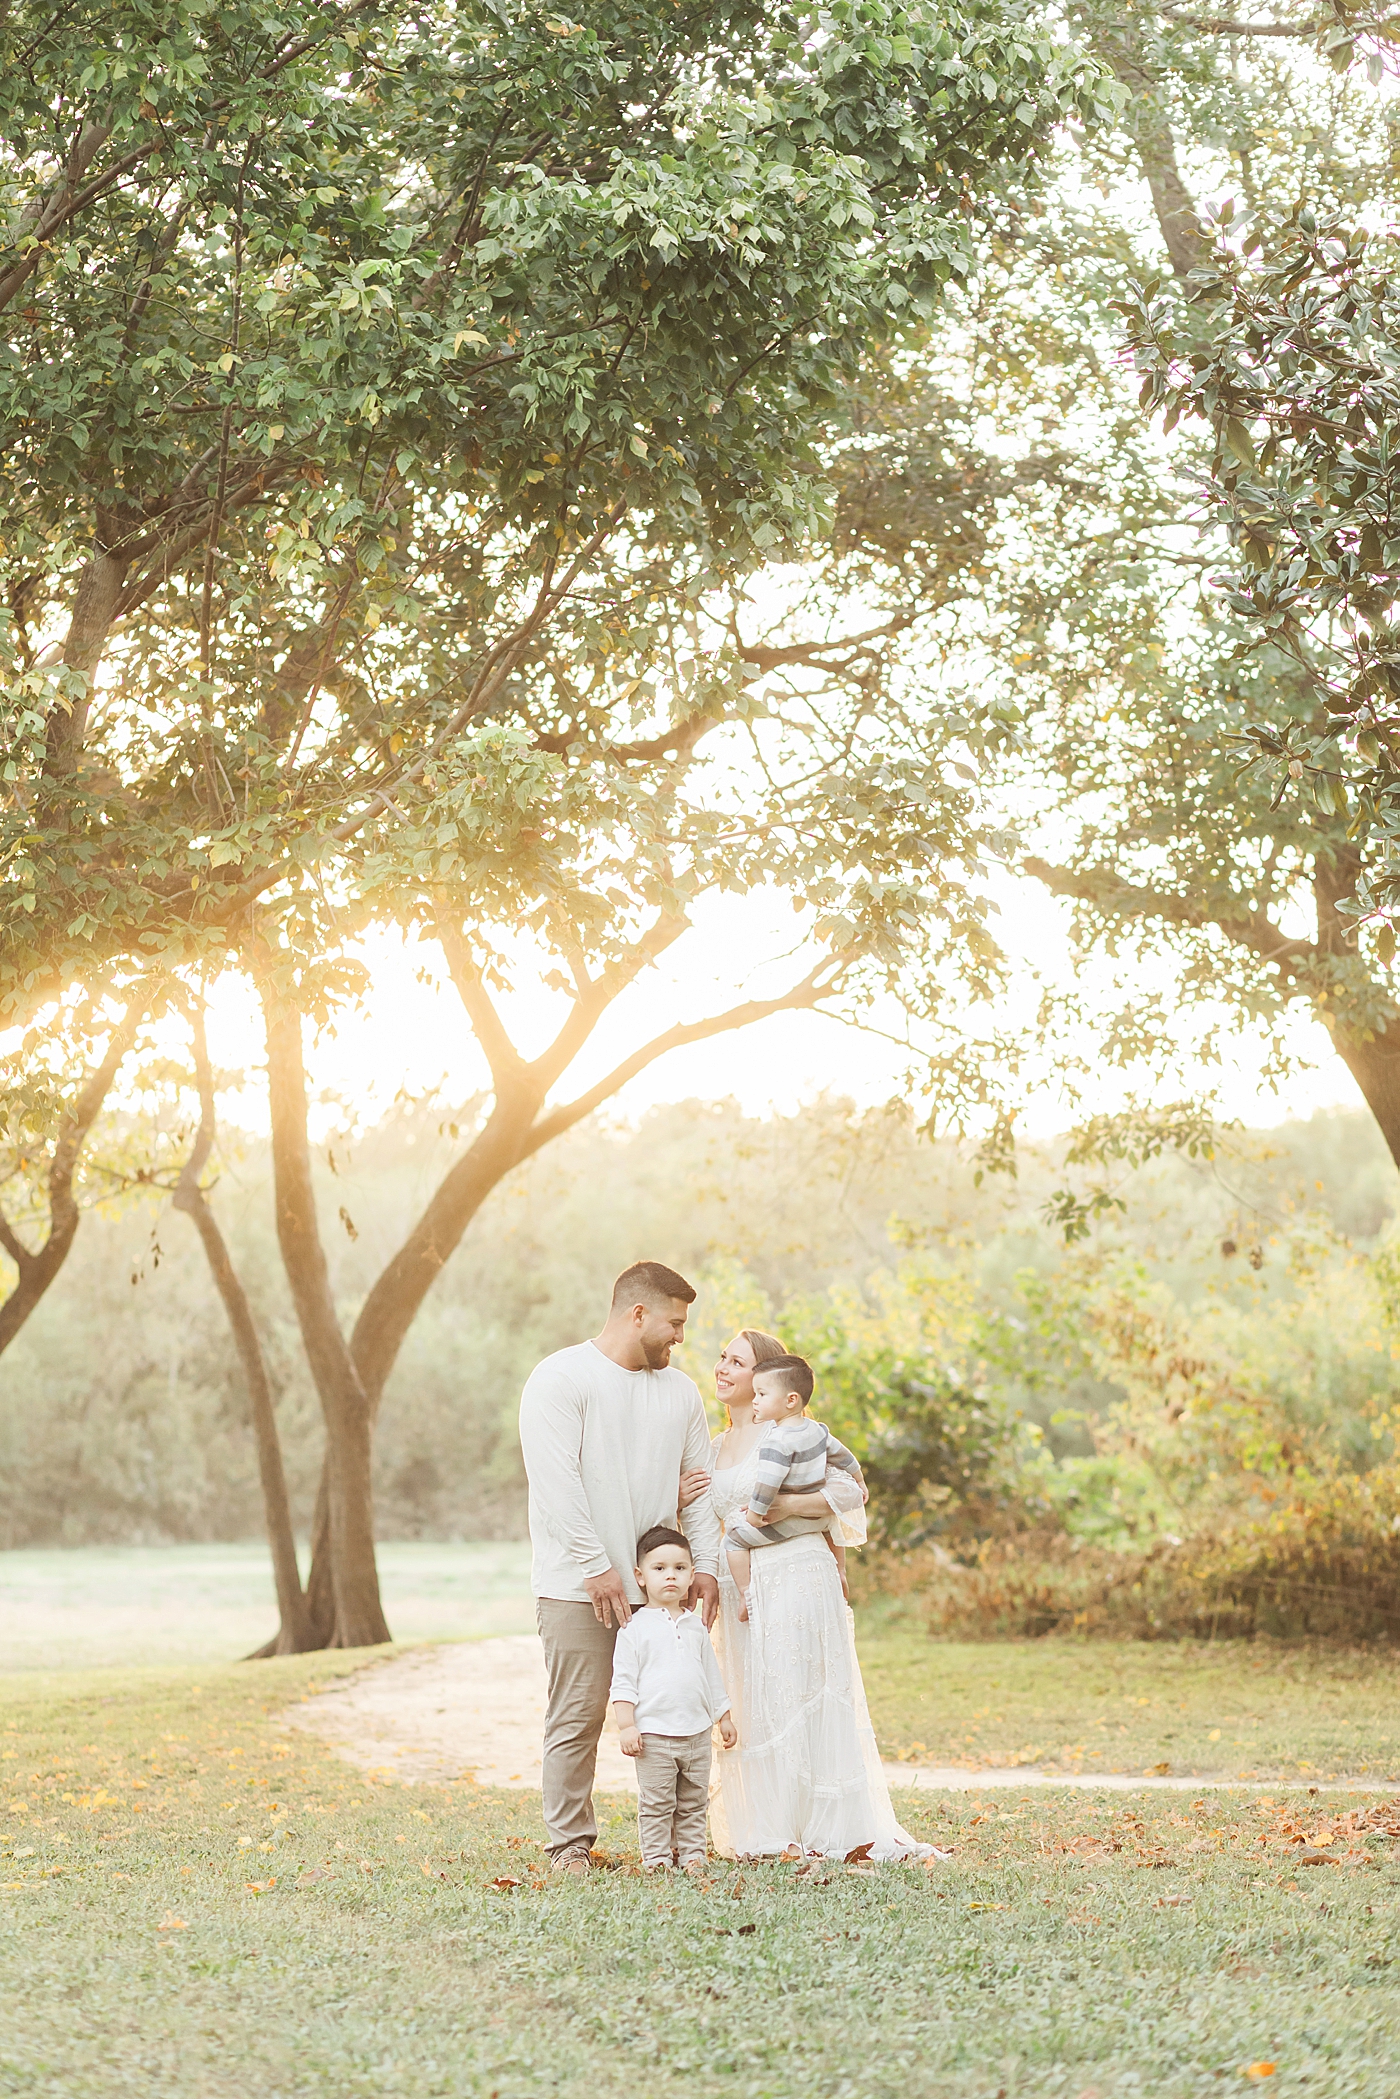 Sunset outdoor session in Houston with family photographer, Fresh Light Photography.